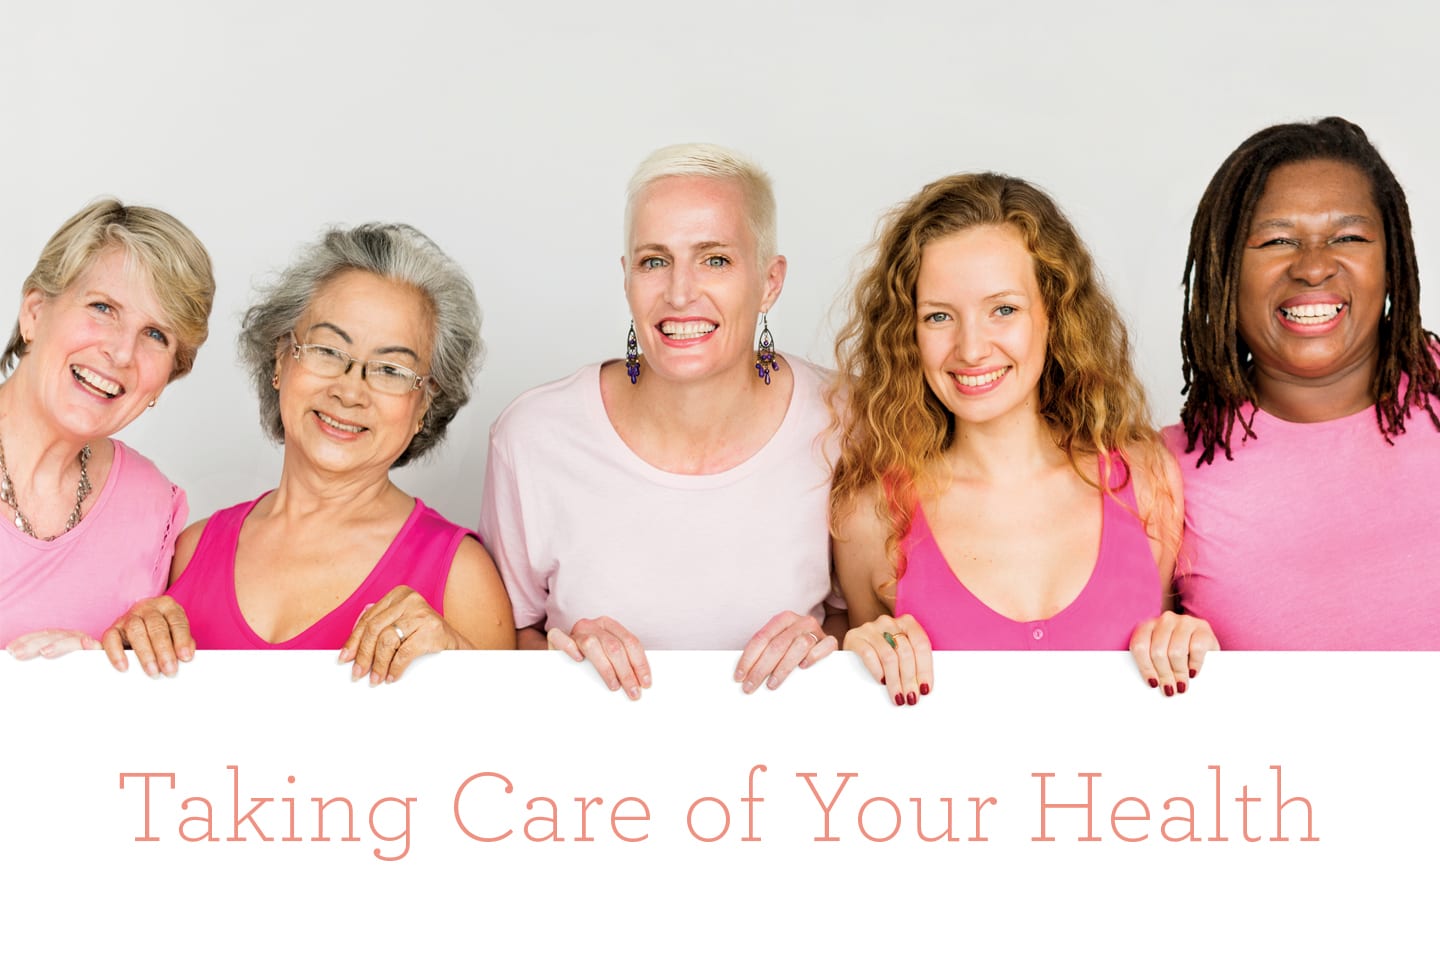 women wearing red and pink holding taking care of your health sign chattanooga